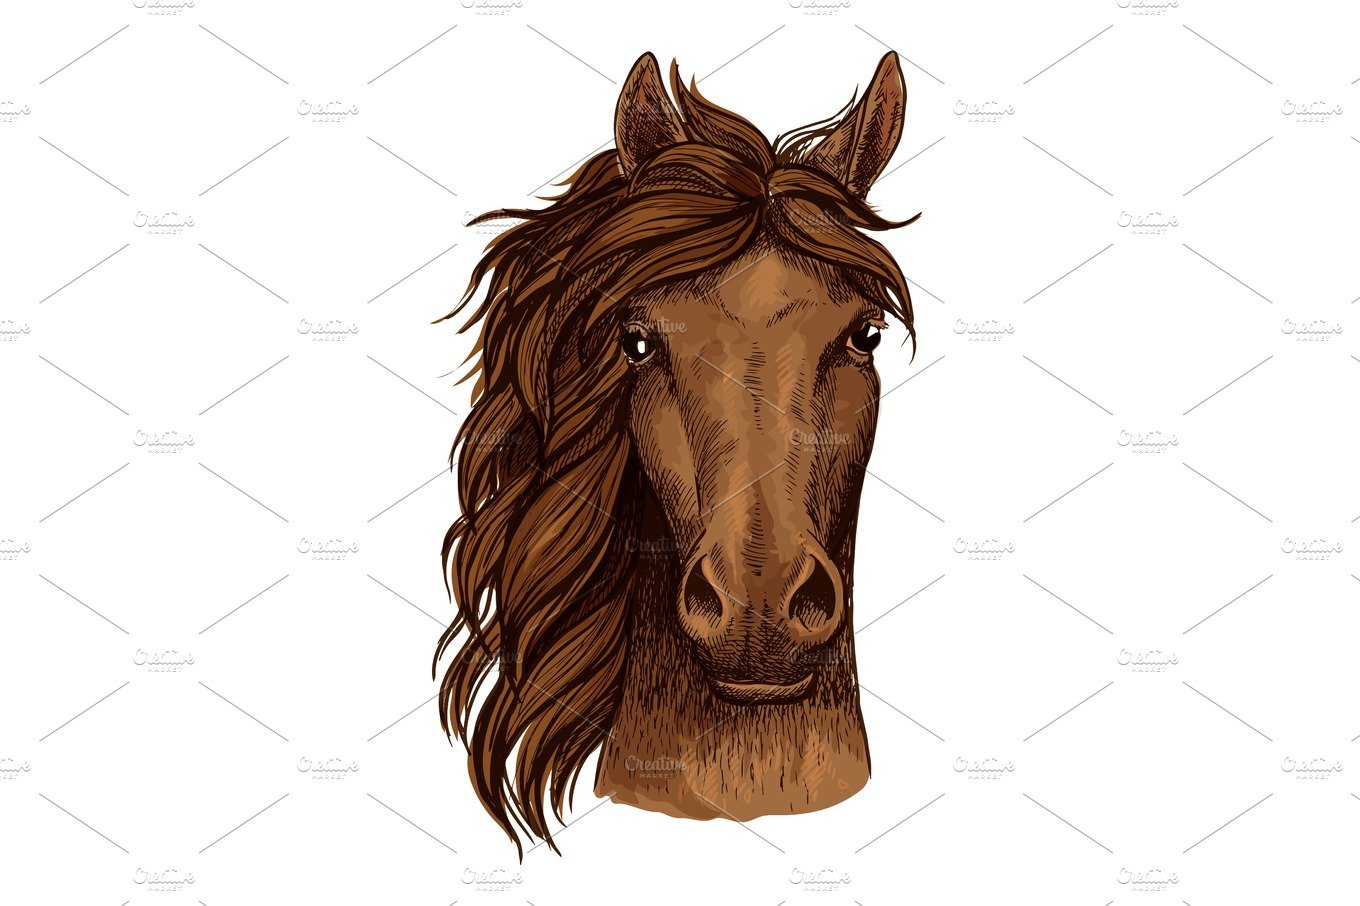 Horse head sketch of brown arabian racehorse cover image.